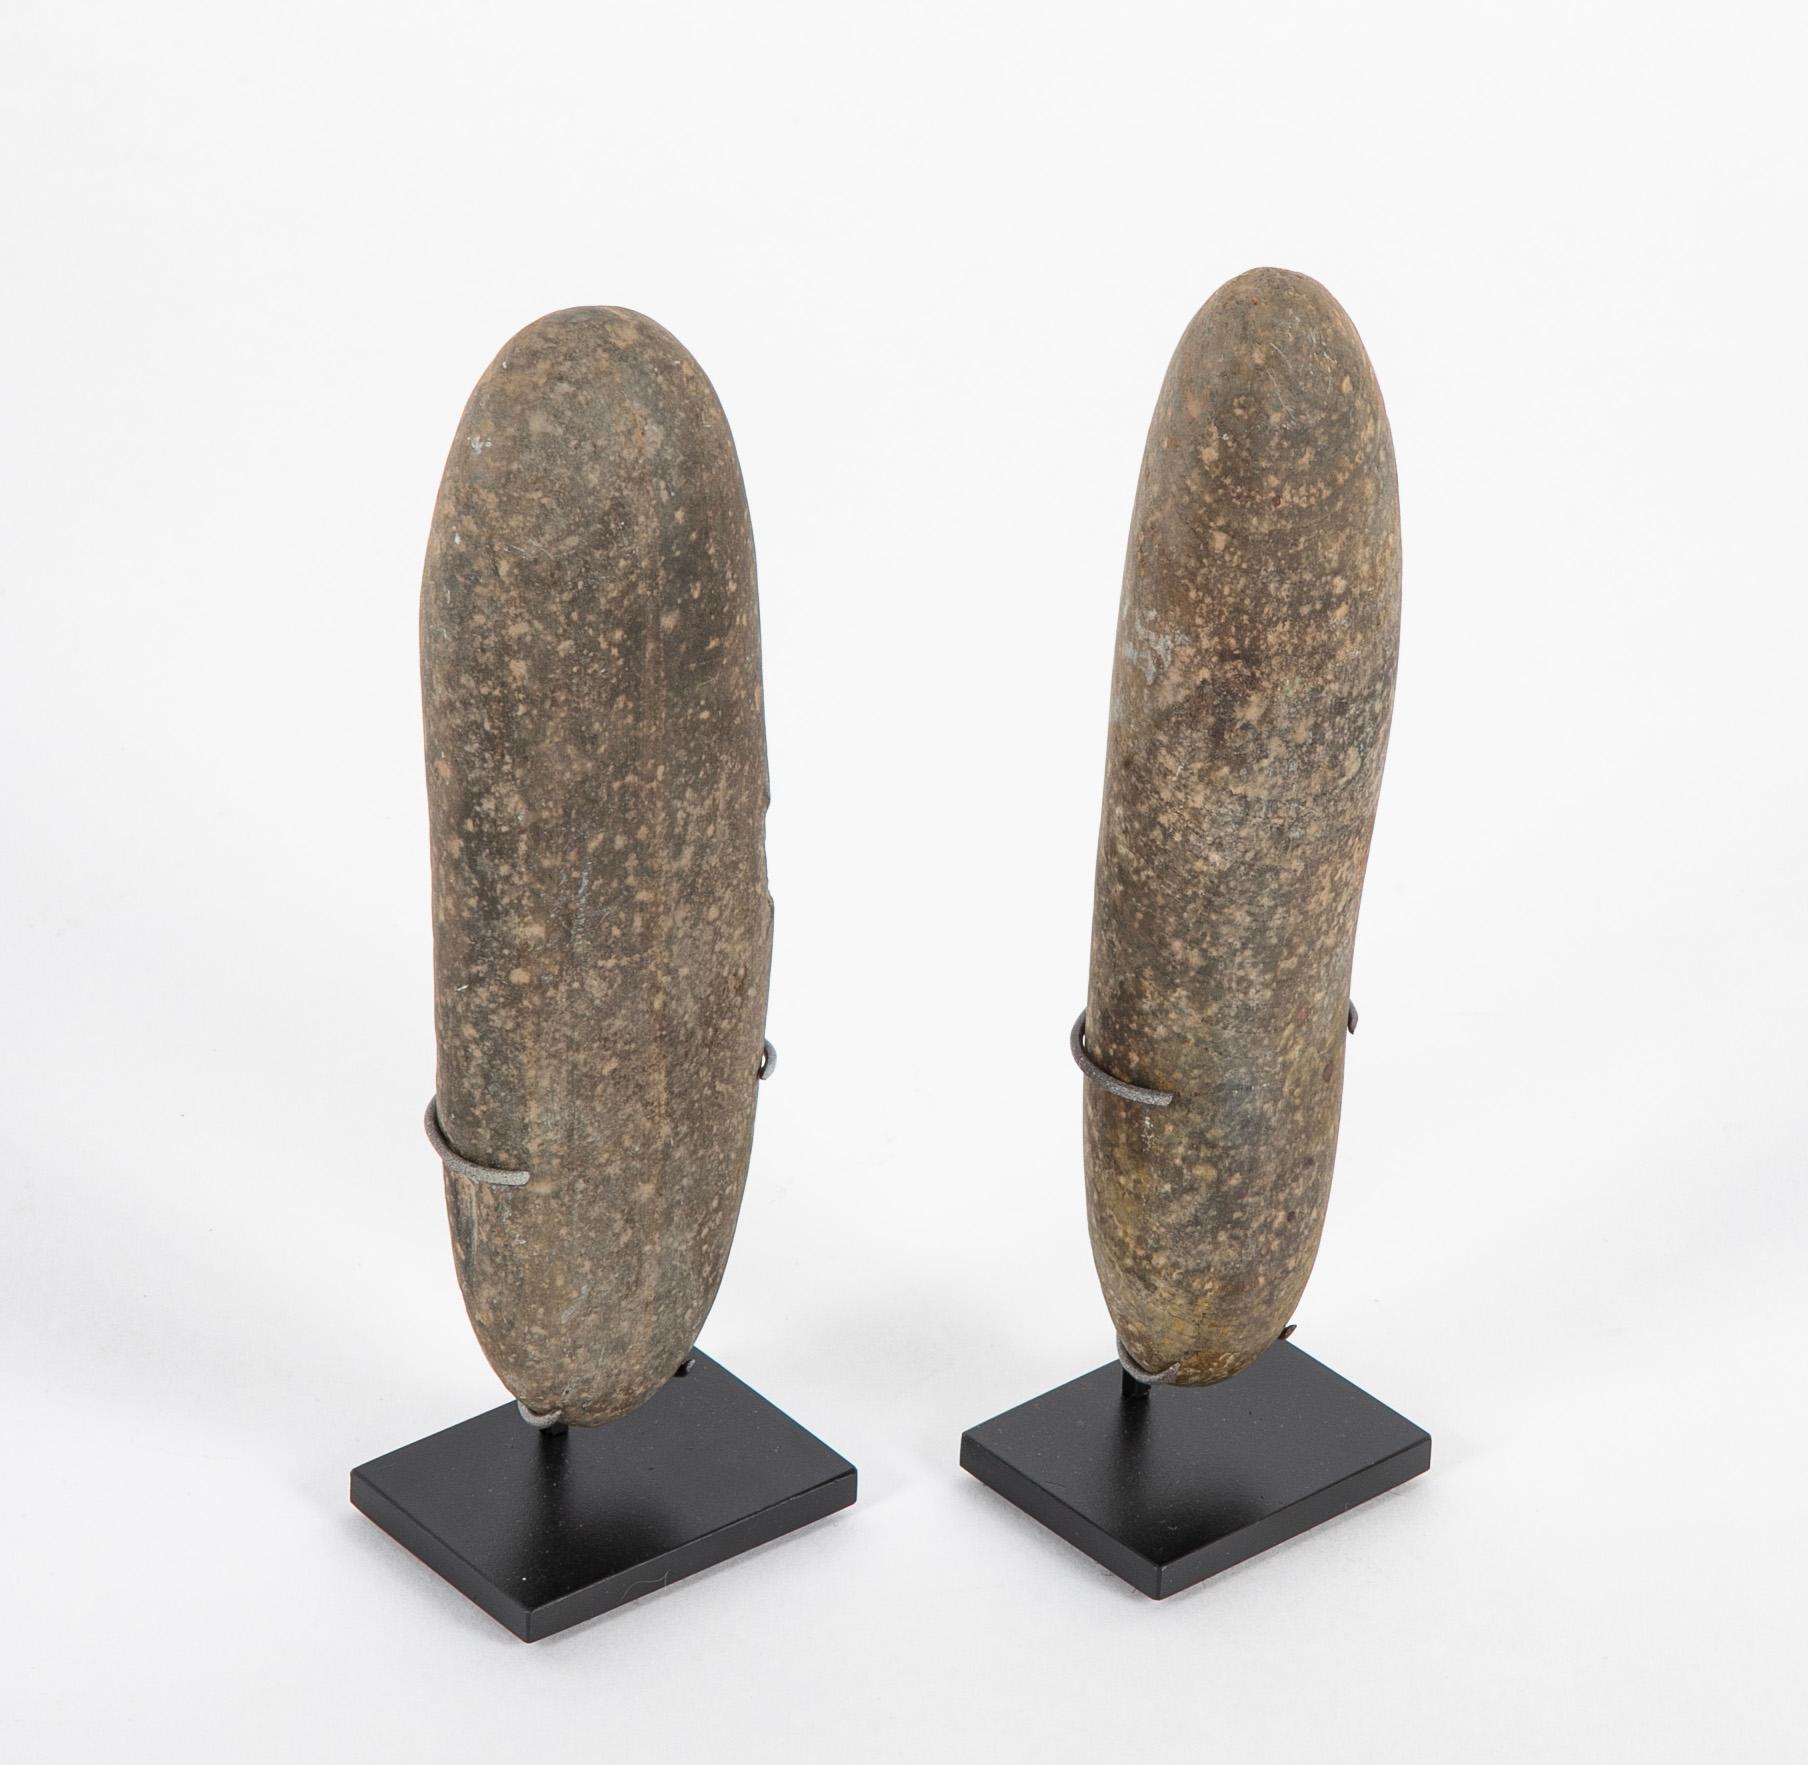 Two Neolithic basalt celts mounted on black steel bases. In archaeology, a celt is a long, thin, prehistoric, stone or bronze tool used as an adze, hoe, hammer or axe. They are beautiful prehistoric objects as compelling as a modern sculpture. Each